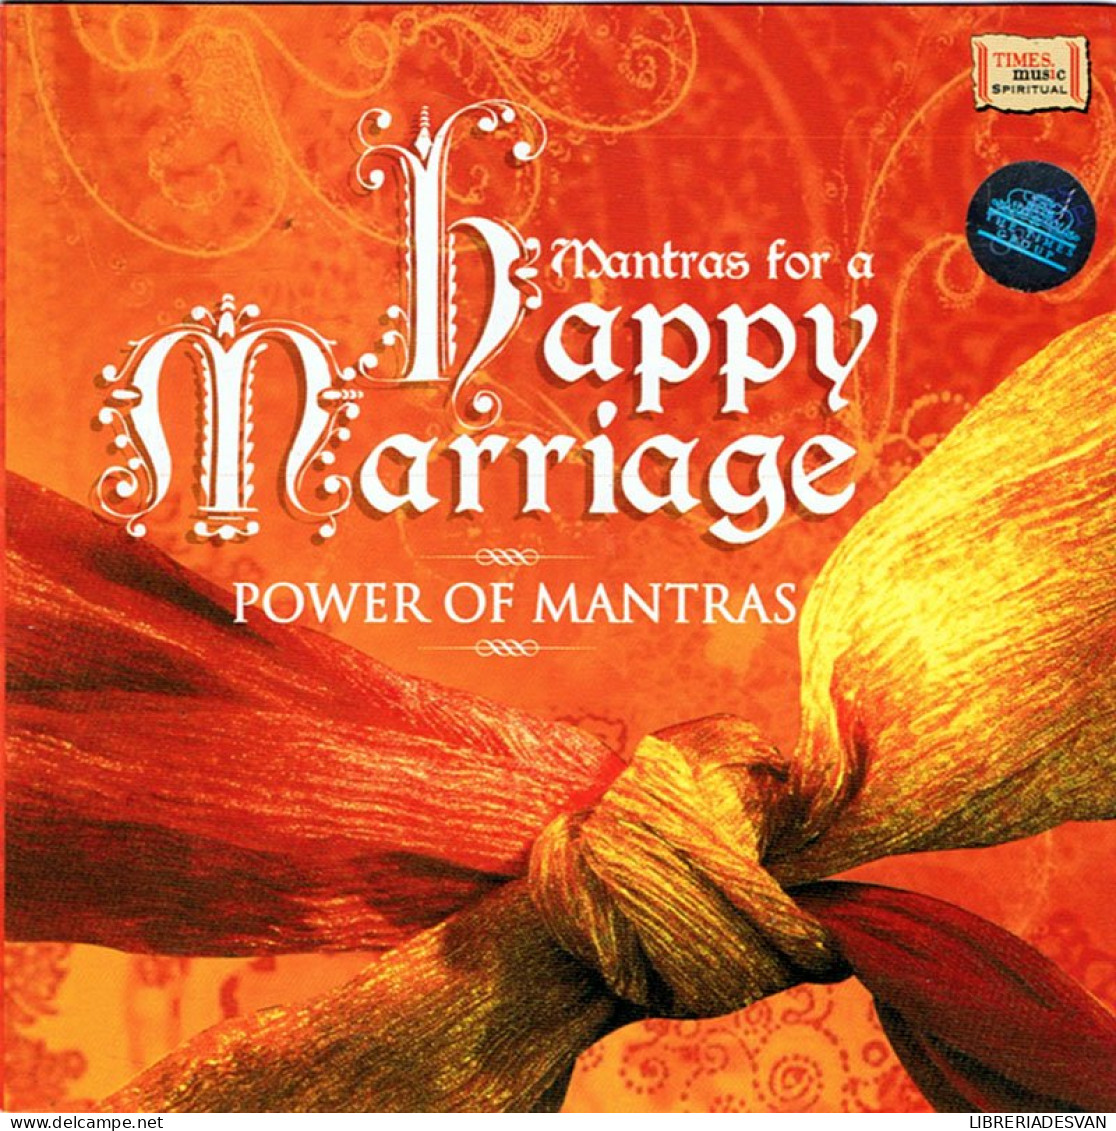 Mantras For A Happy Marriage. Power Of Mantras. CD - New Age